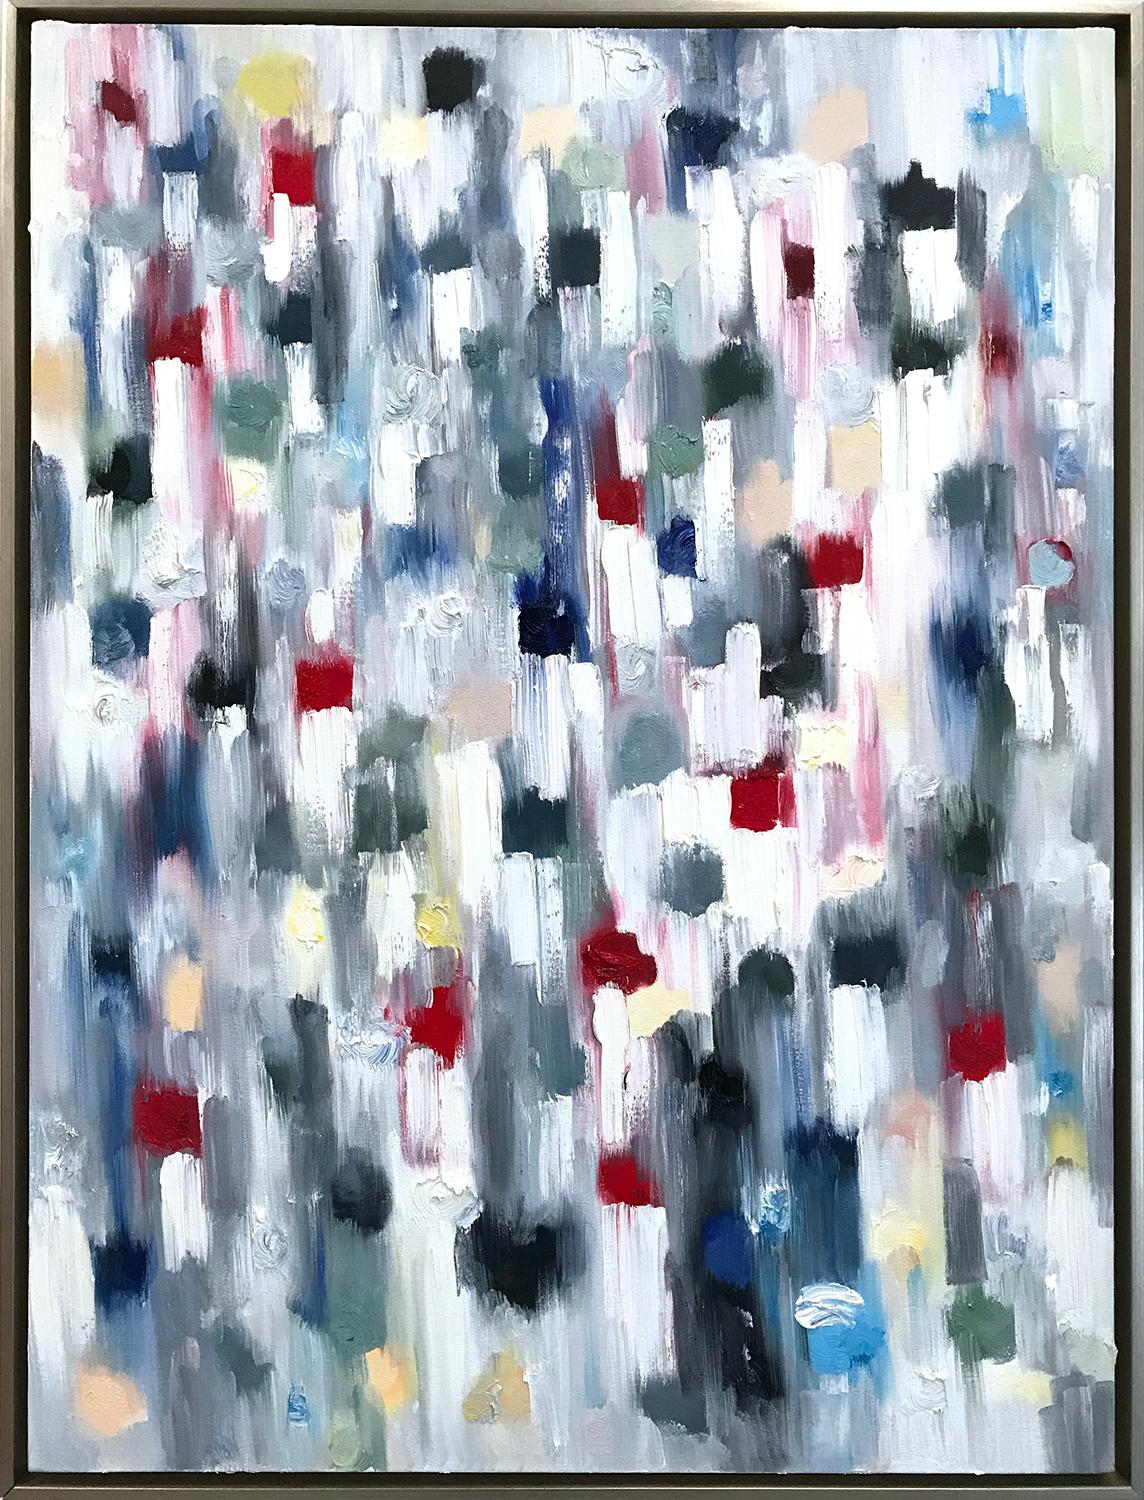 Cindy Shaoul Abstract Painting - "Dripping Dots - Capri" Colorful Abstract Oil Painting on Canvas